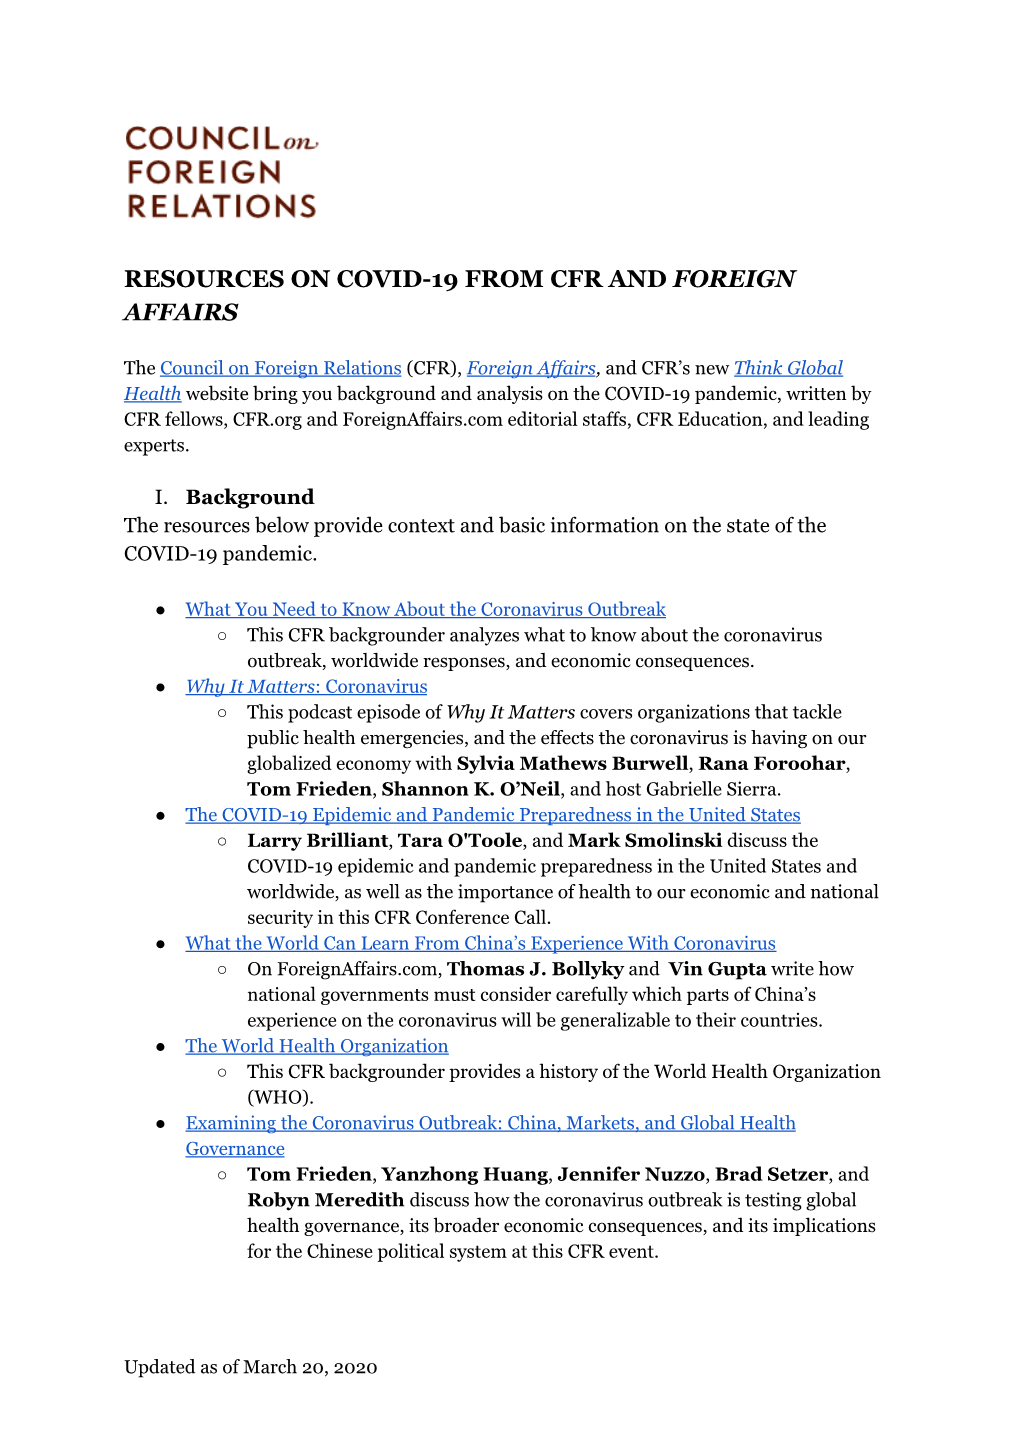 Resources on Covid-19 from Cfr and ​Foreign Affairs